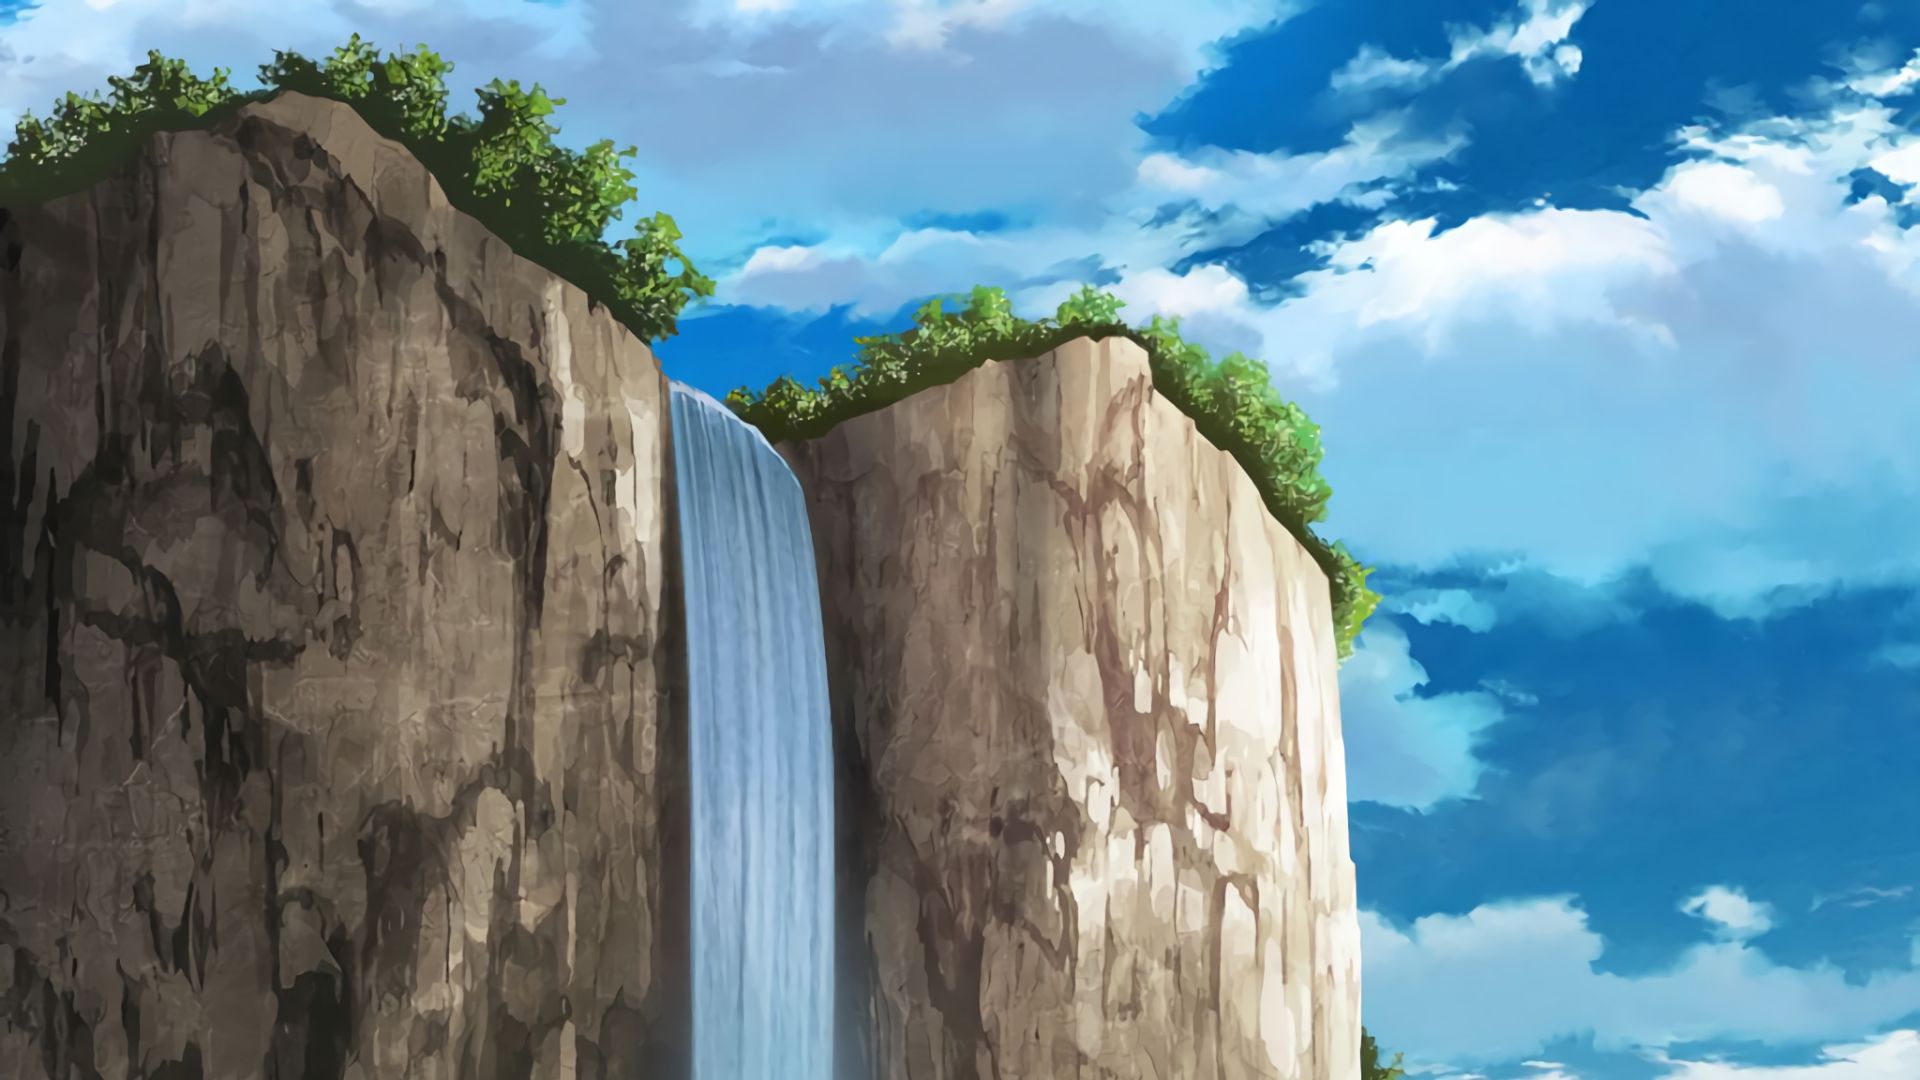 Desktop Wallpaper Anime, Water Fall, Hd Image, Picture, Background, 5jvgc9